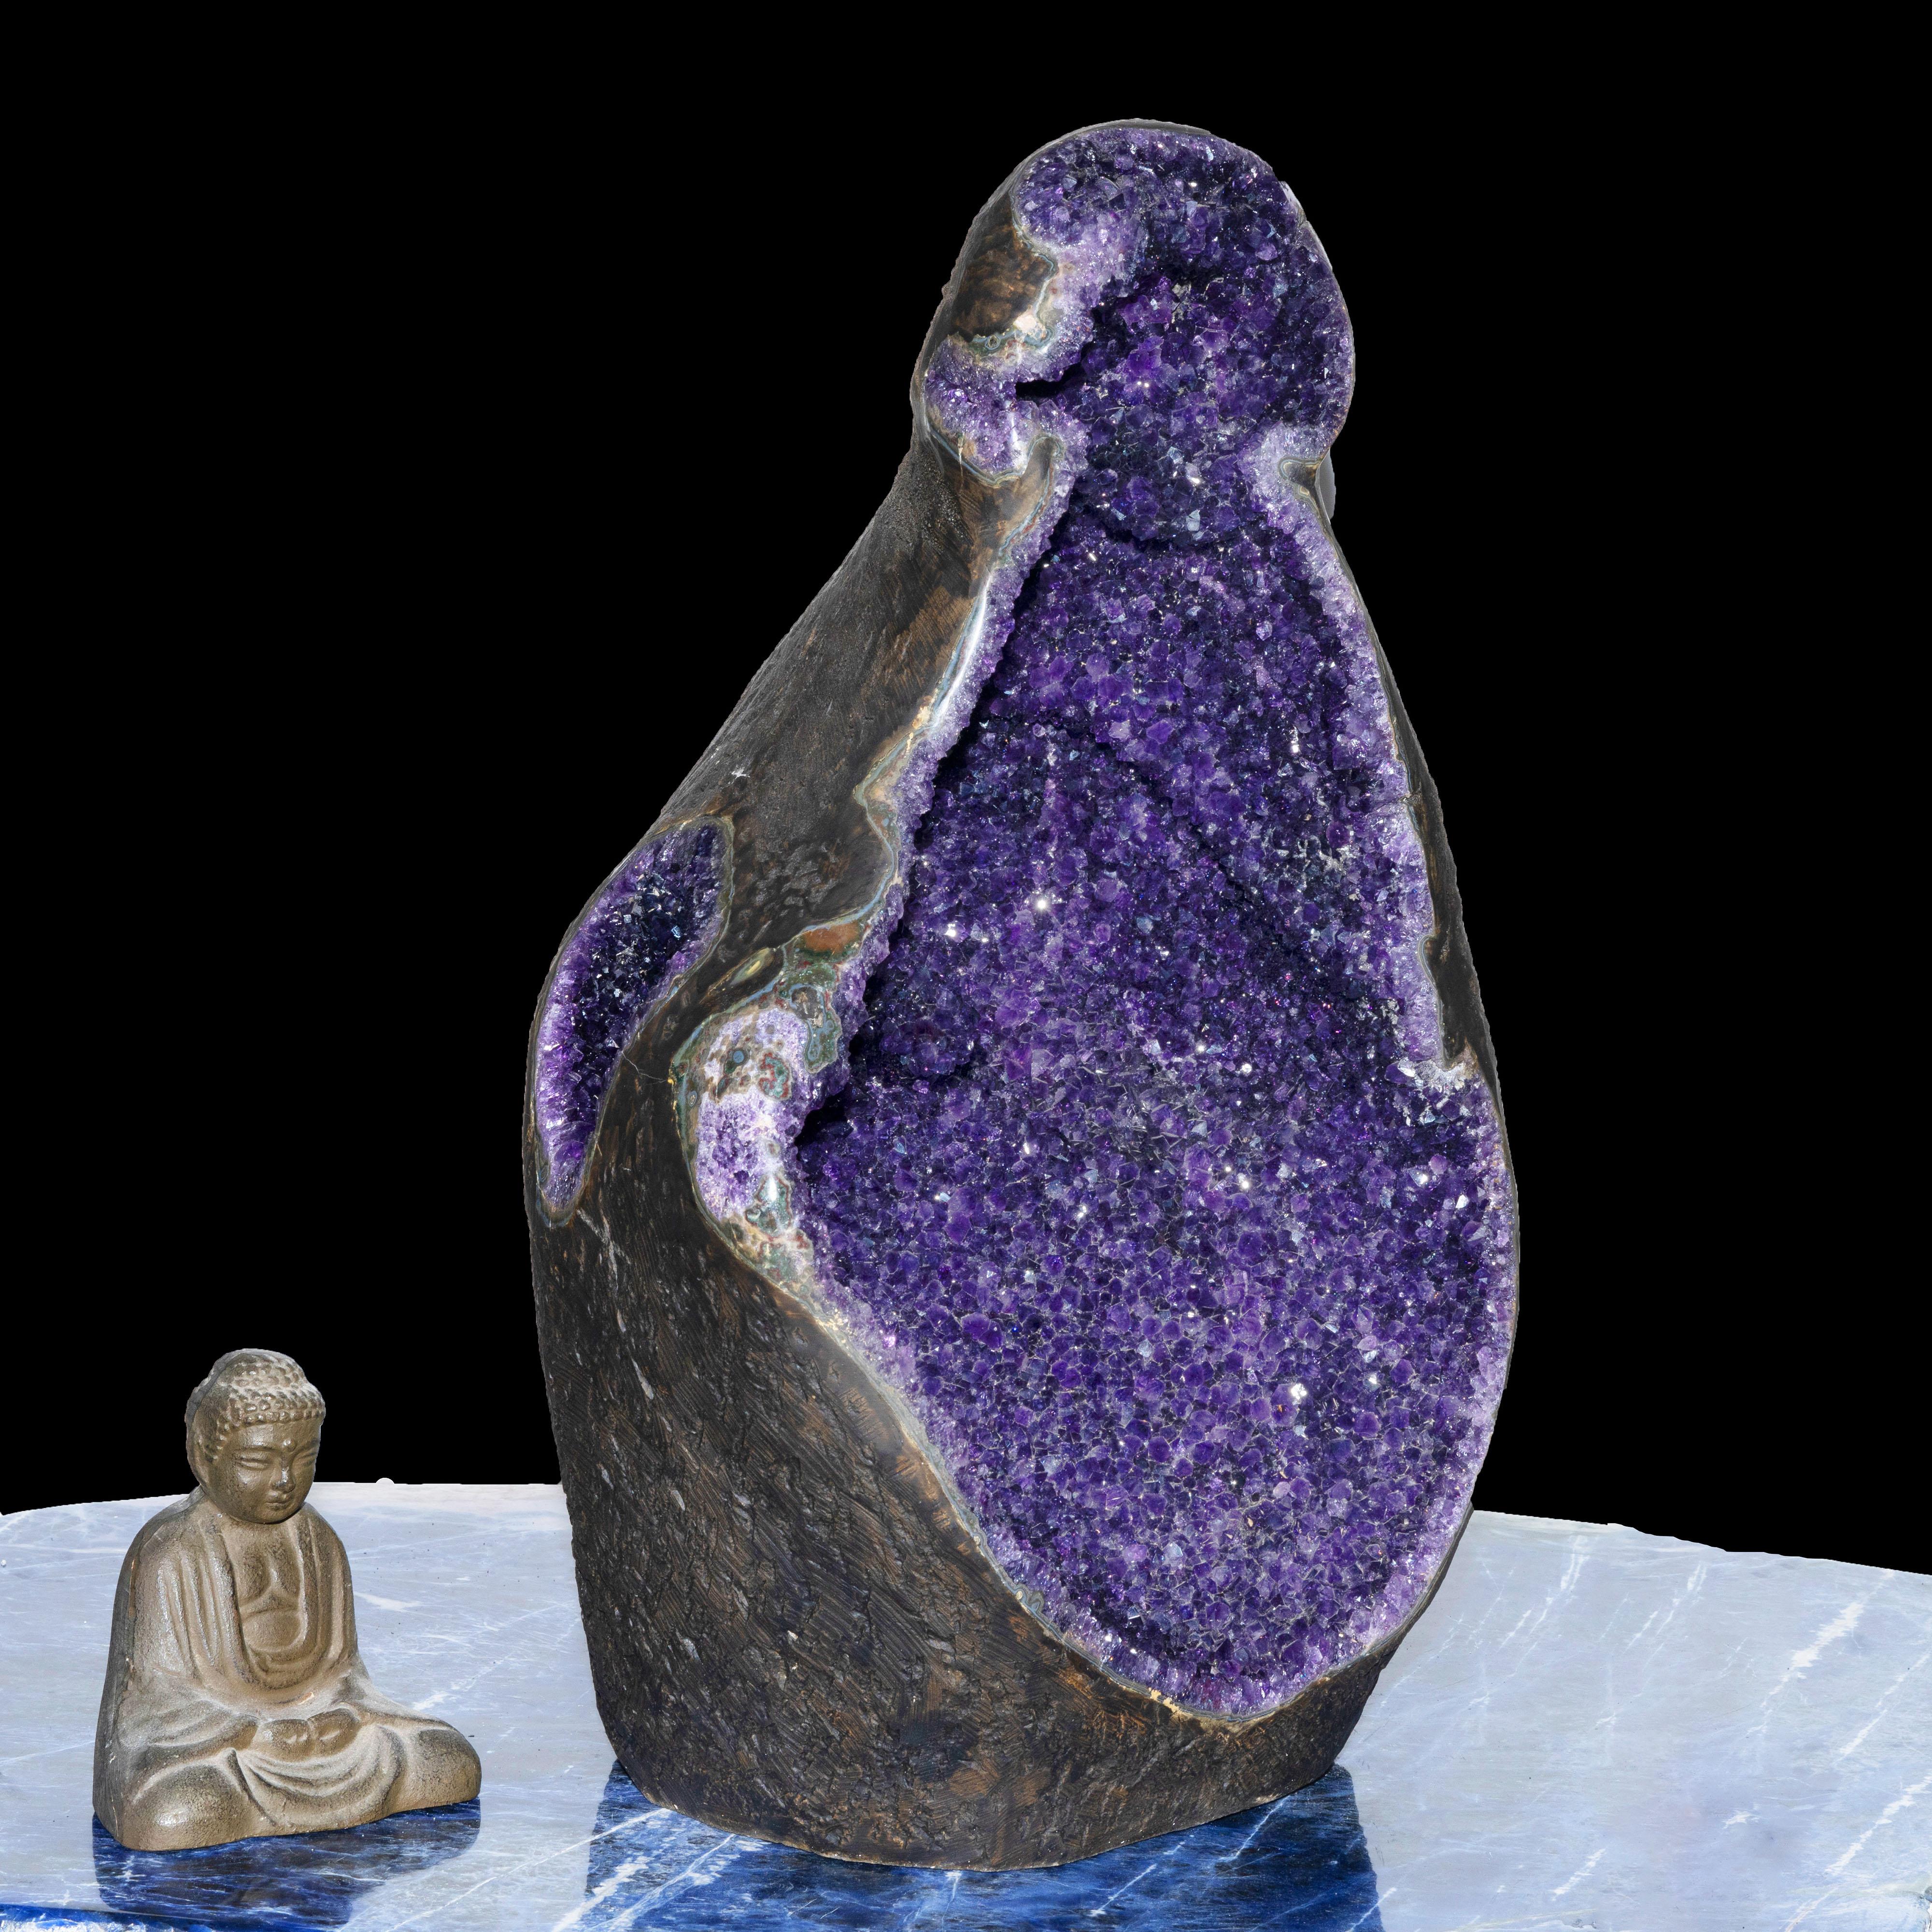 This over one and a half foot tall more than fifty pound sculptural amethyst geode from Uruguay glistens from within with a lustrous coating of naturally terminated, fully formed deep purple amethyst crystals. Featuring a stalactite and natural